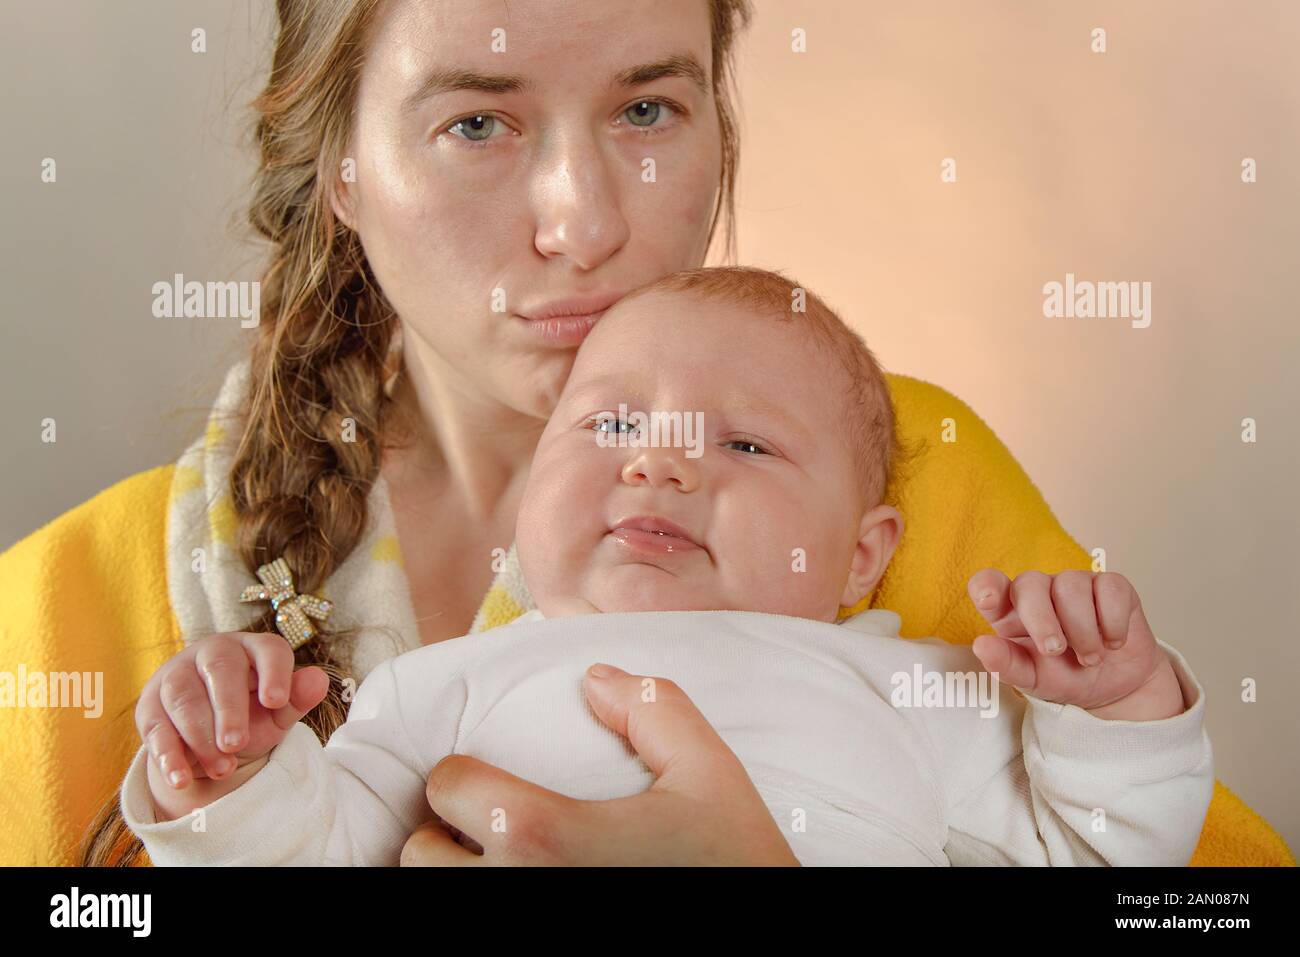 Mom holds the baby in her arms and poses for the camera in the studio, the concept of love and unity and care for loved ones and younger ones. Stock Photo